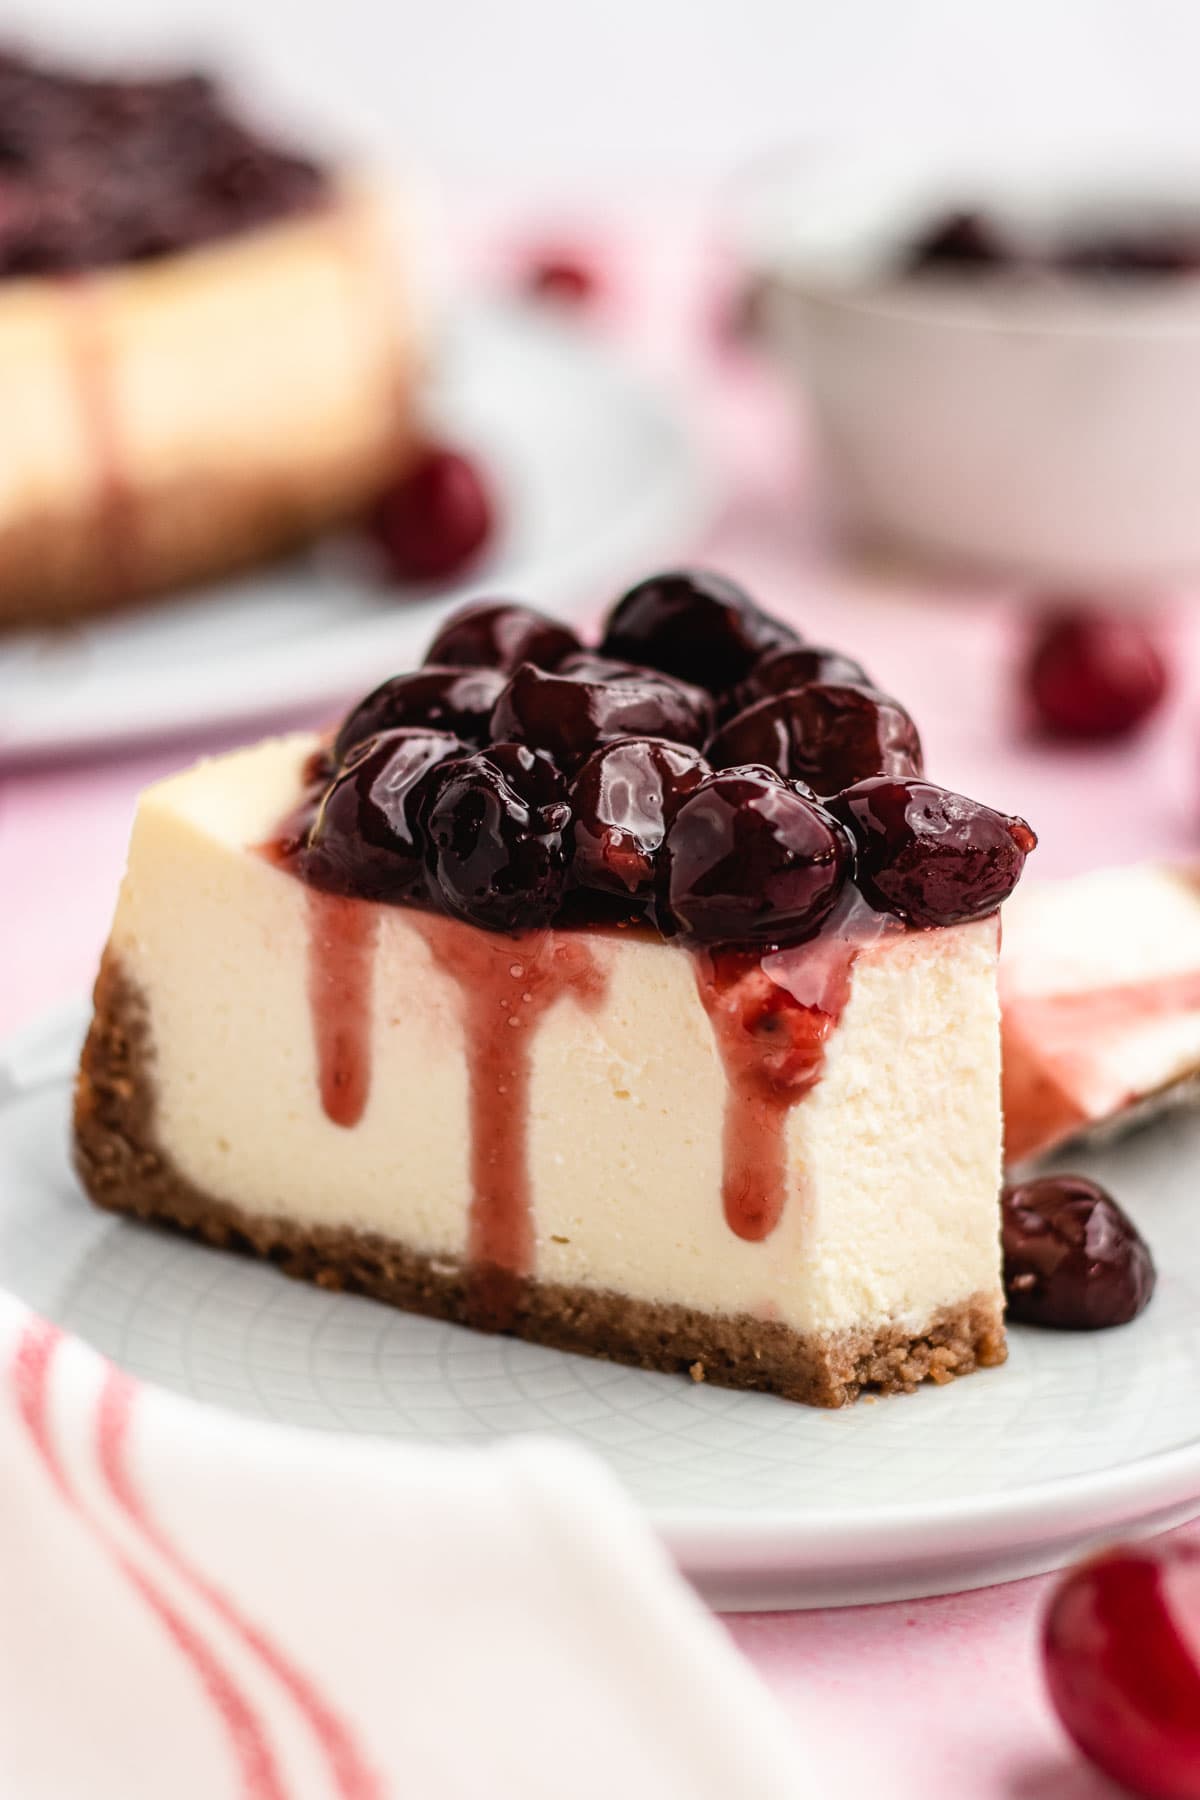 Cherry Cheesecake slice on plate with bite removed